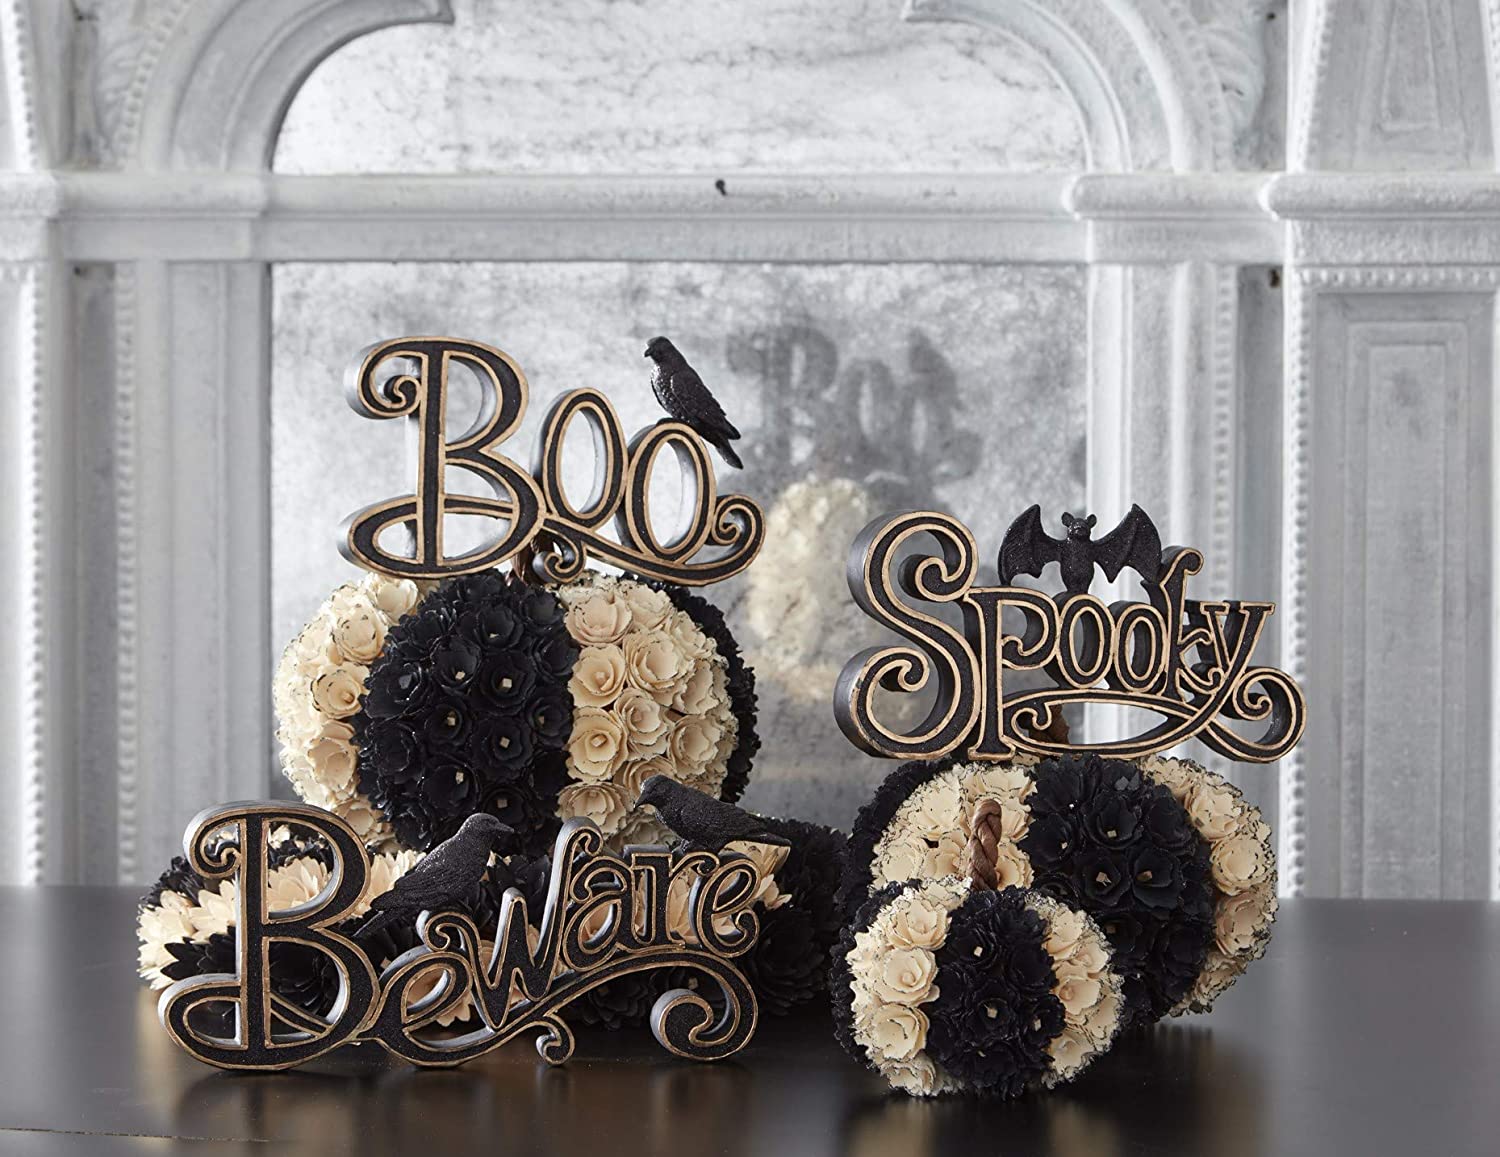 Halloween Table decorated with Boo, Spooky, & Beware Word Signs